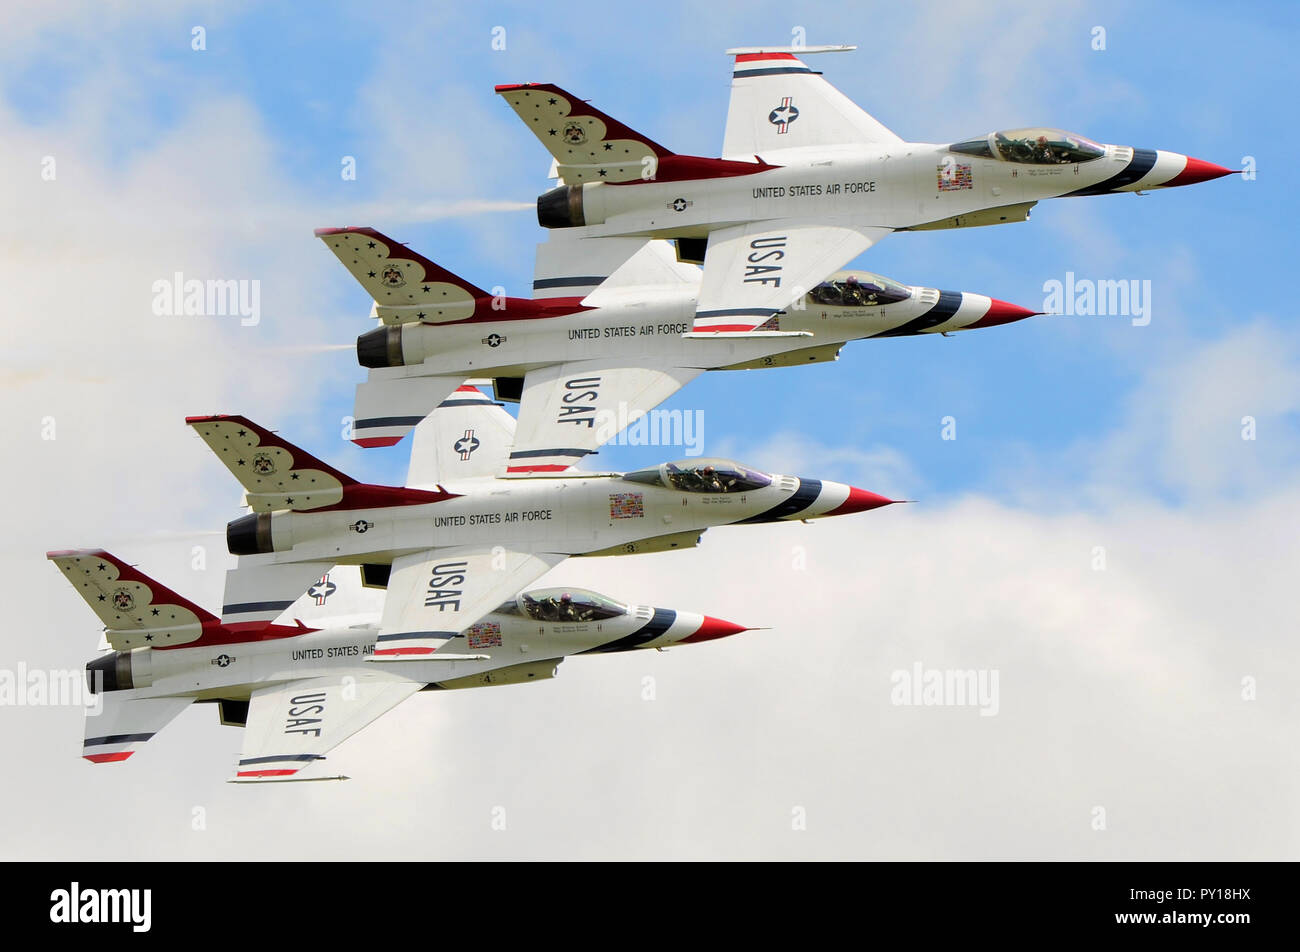 US Air Force Thunderbirds Air Demonstration Squadron display team fighter jet planes at RAF Waddington airshow. Fighter jet planes Stock Photo